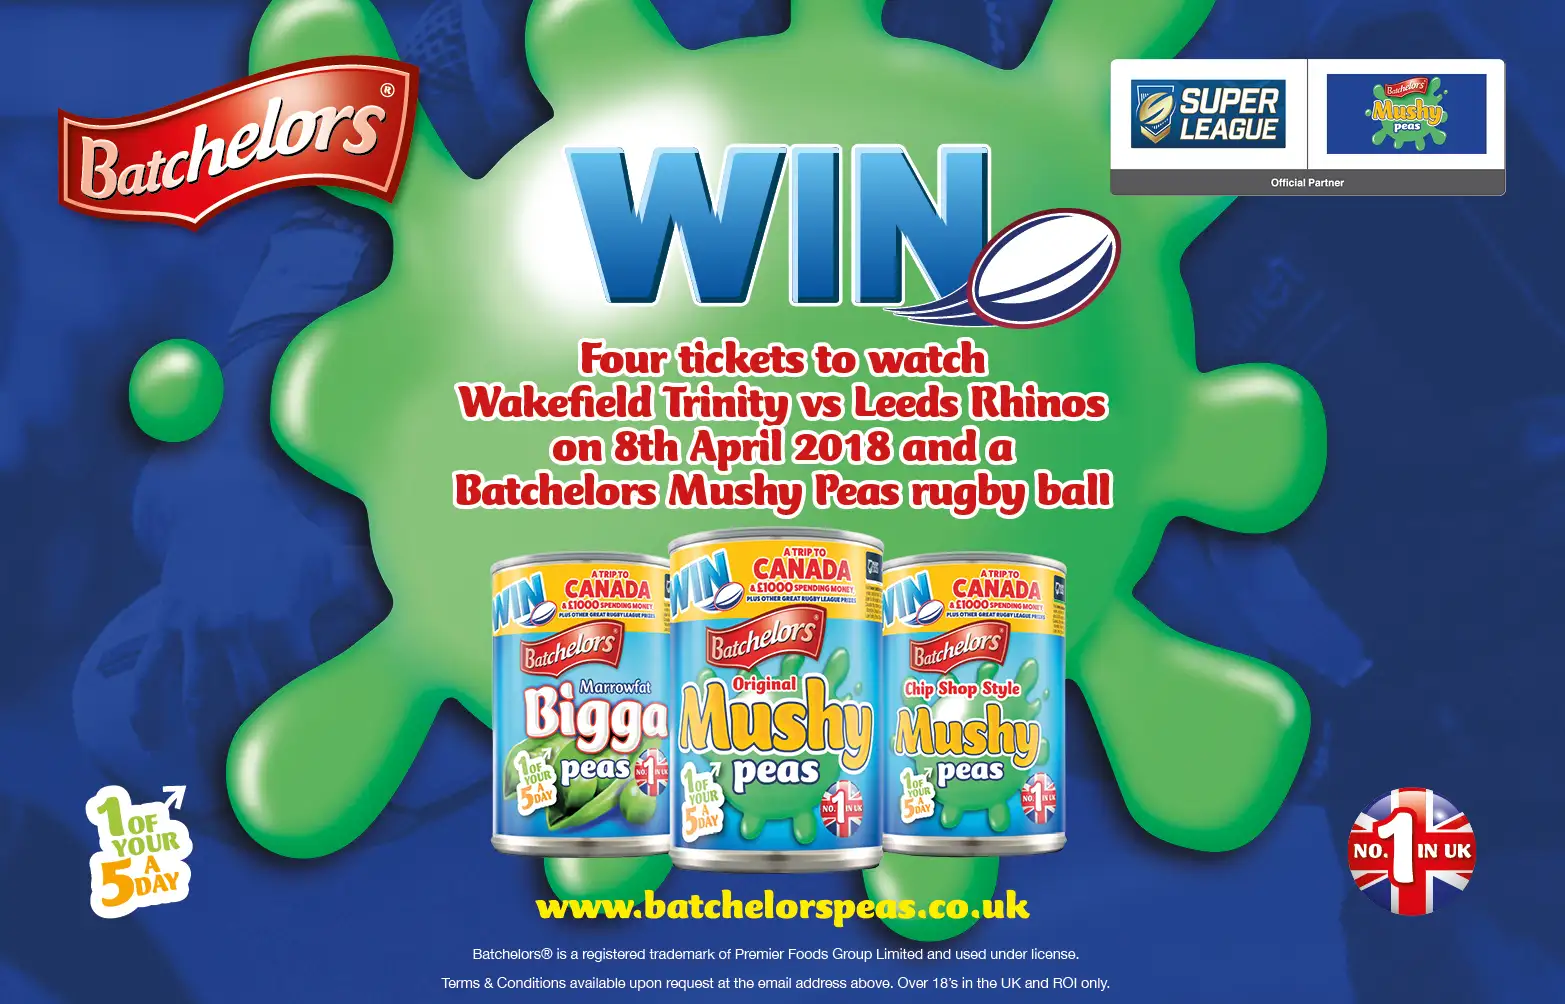 WIN: Four tickets to watch Wakefield v Leeds plus a Batchelors Mushy Peas rugby ball!